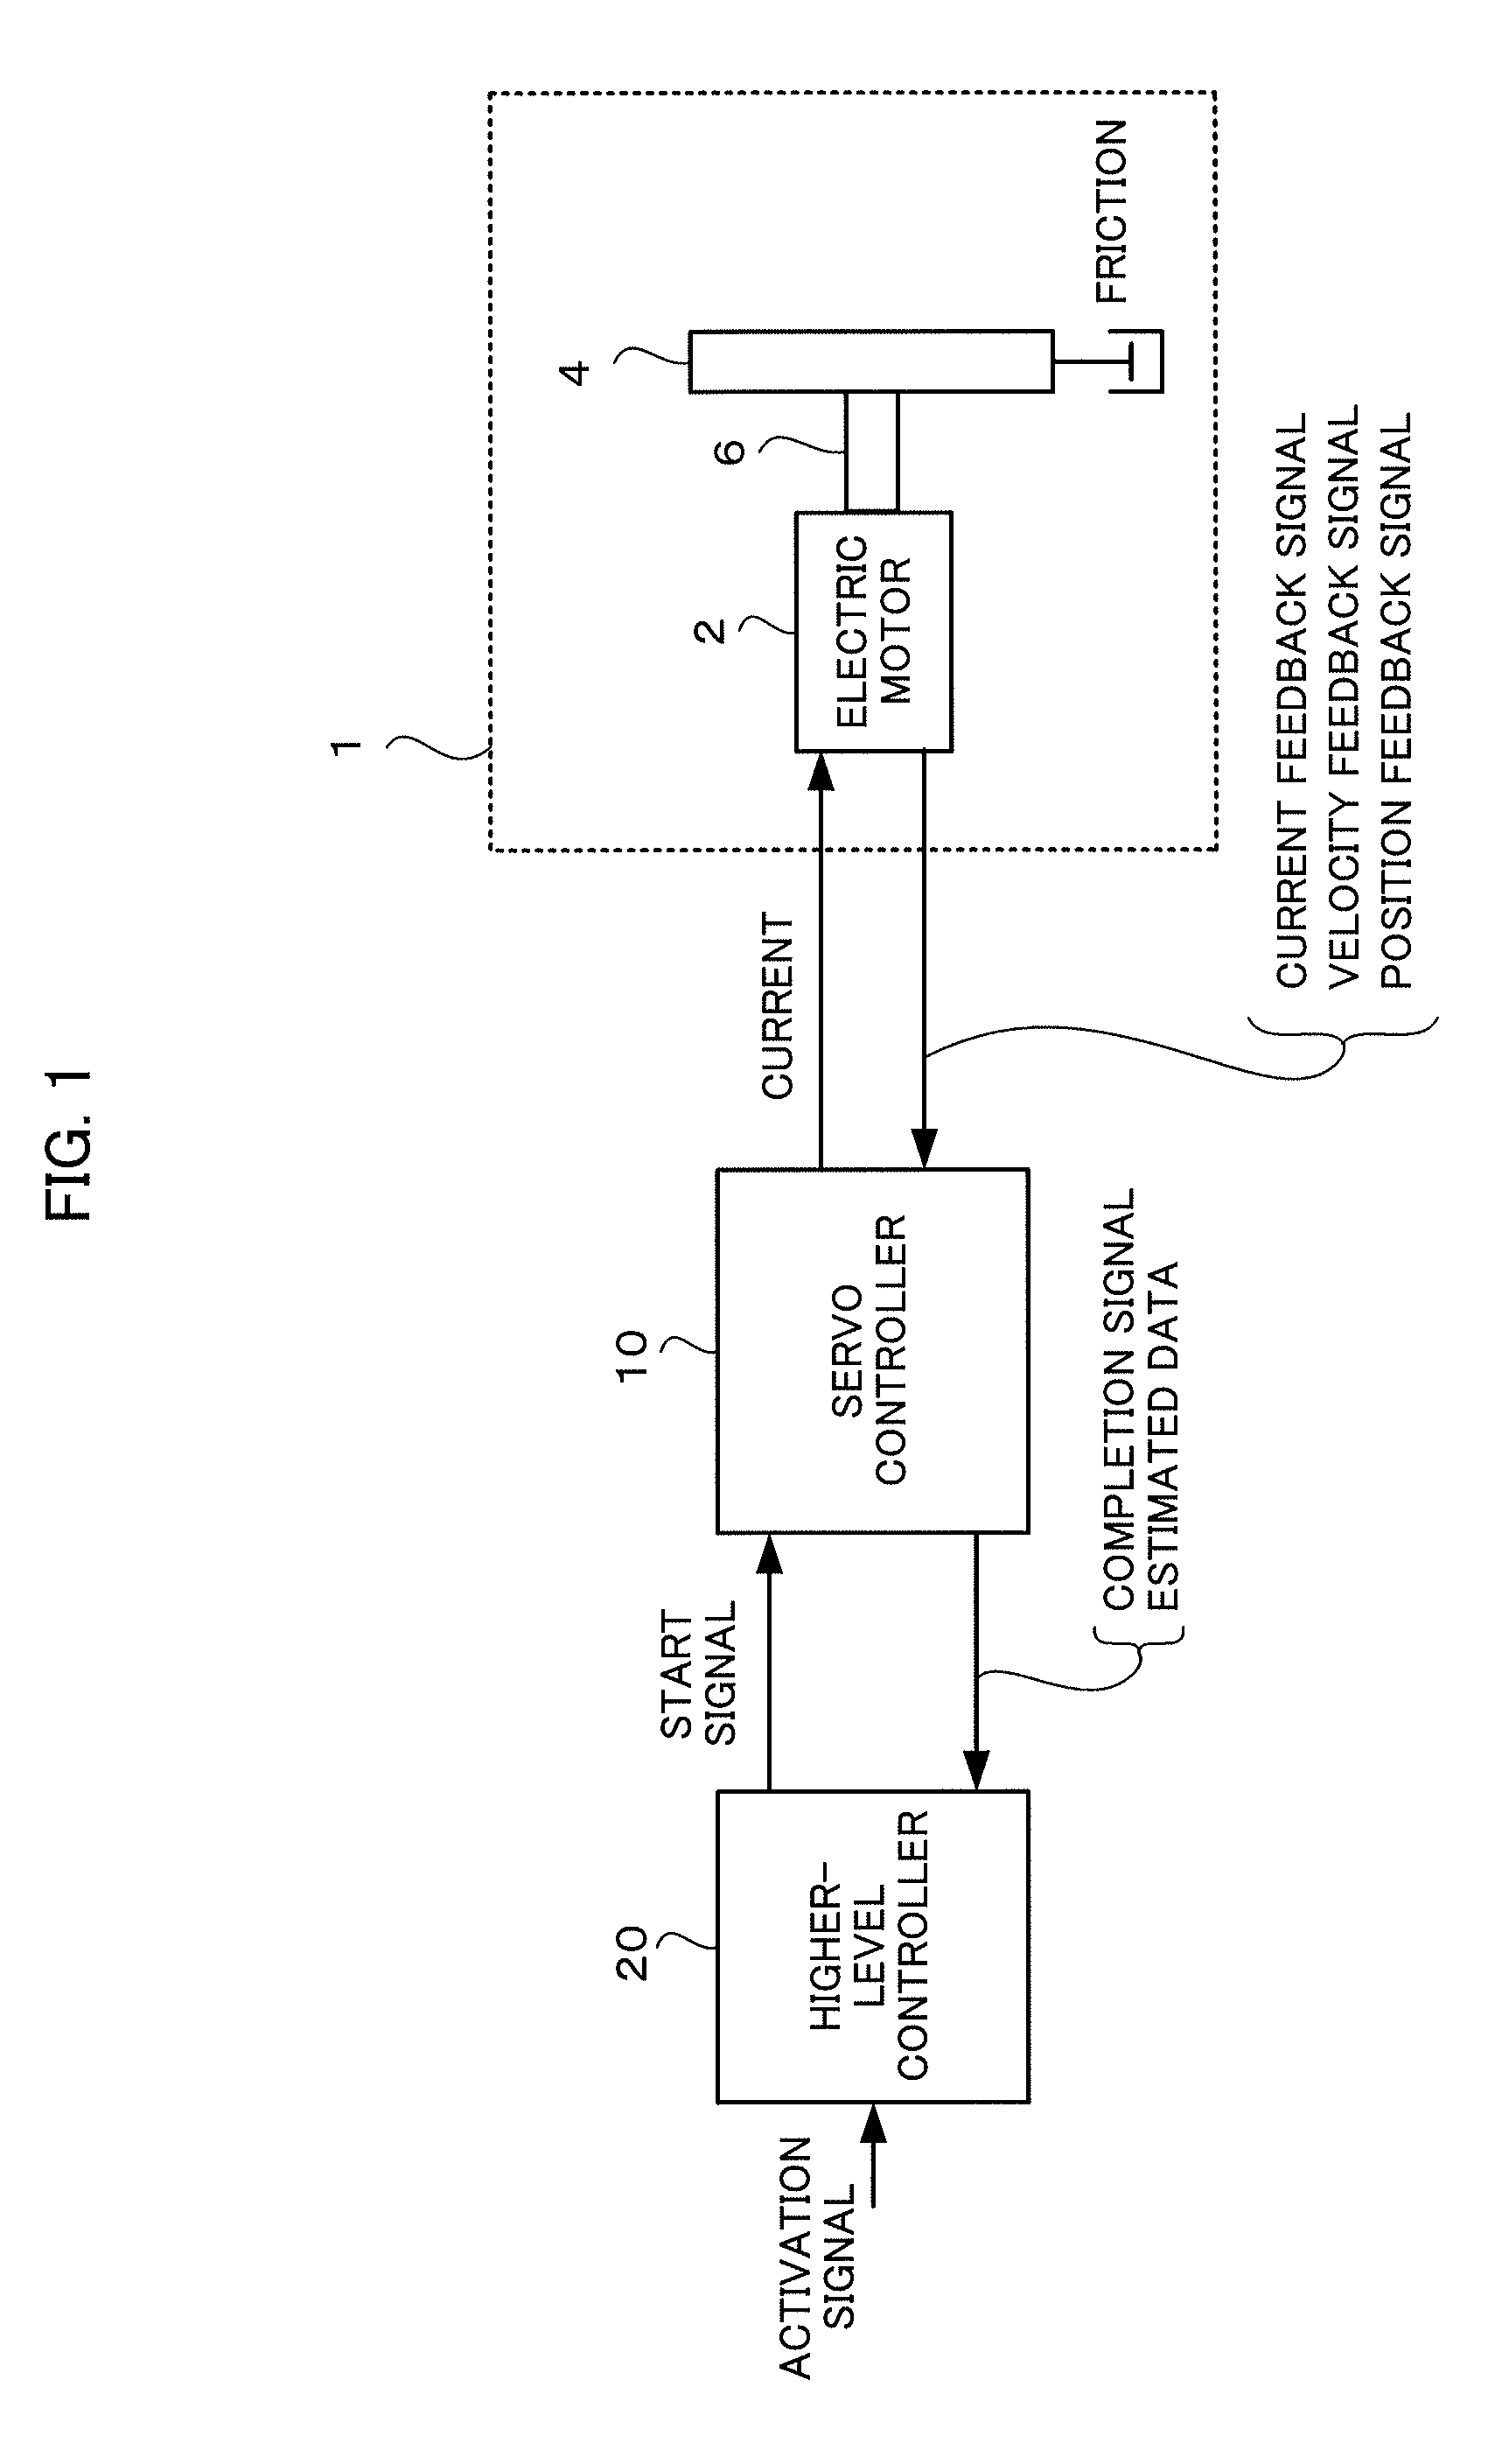 Electric motor controller comprising function for simultaneously estimating inertia, friction, and spring